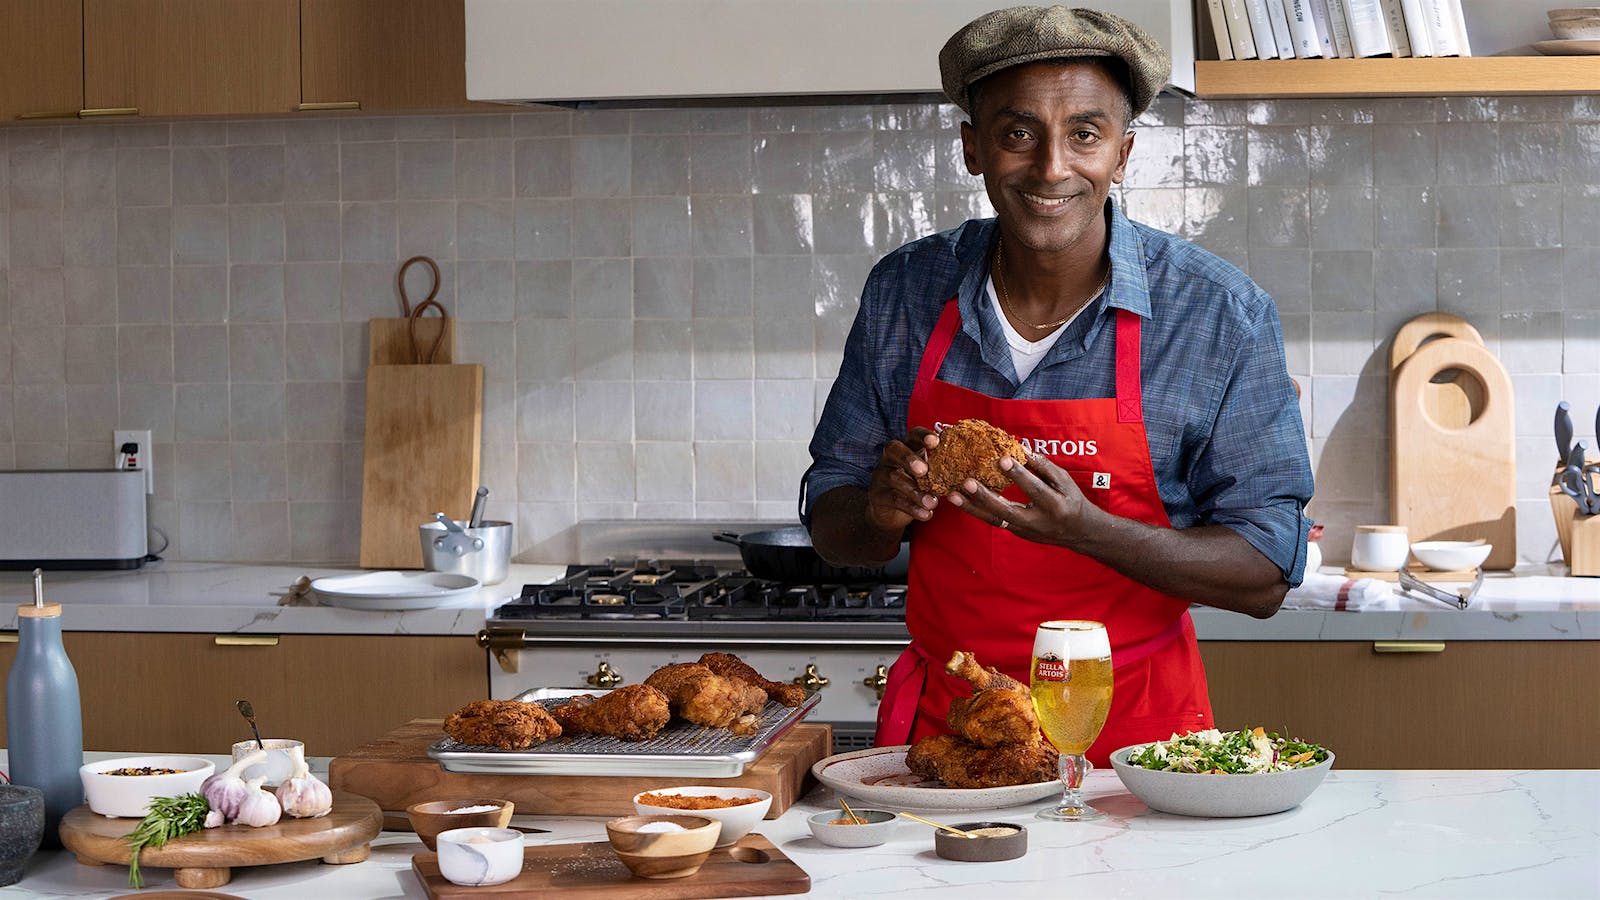 Charity Auction of Culinary NFTs Kicks Off with Marcus Samuelsson’s Fried Chicken Recipe